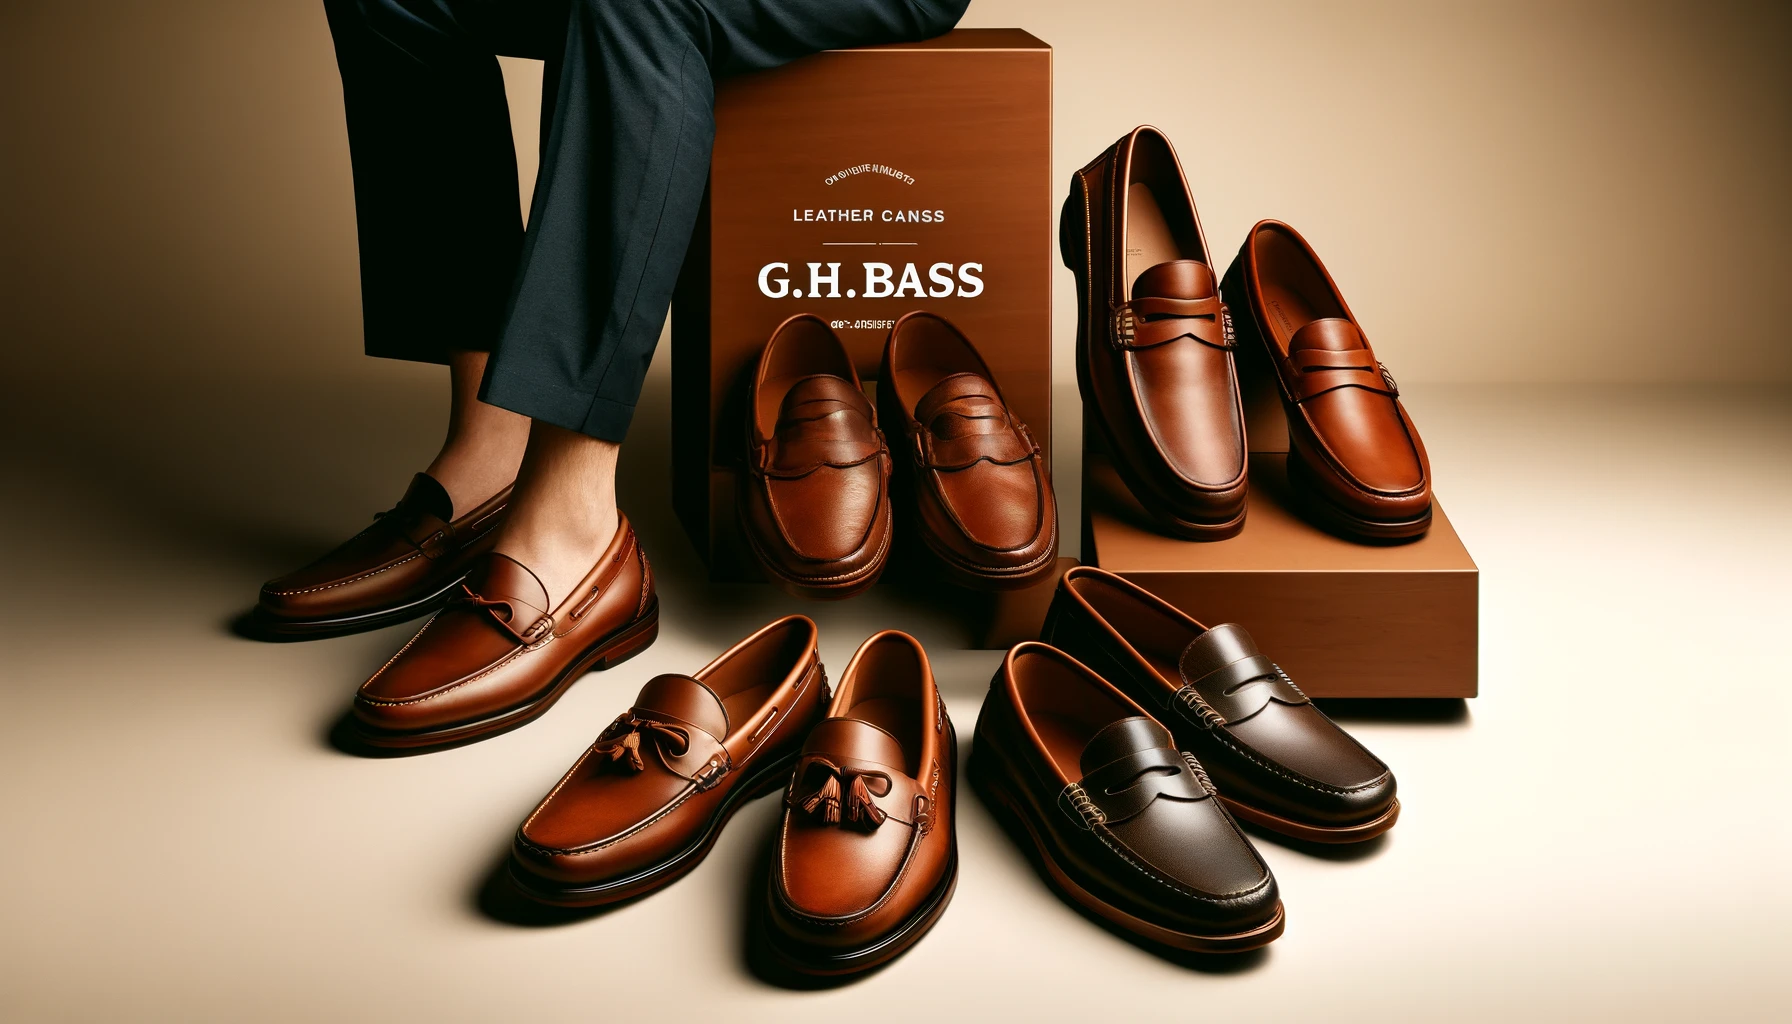 An elegant display of G.H.BASS leather loafers showcasing their size variations. The image features multiple pairs of classic leather loafers in different sizes, arranged in a visually appealing manner. The background is simple and stylish, emphasizing the quality and craftsmanship of the shoes. Include the text 'G.H.BASS' prominently in the image.